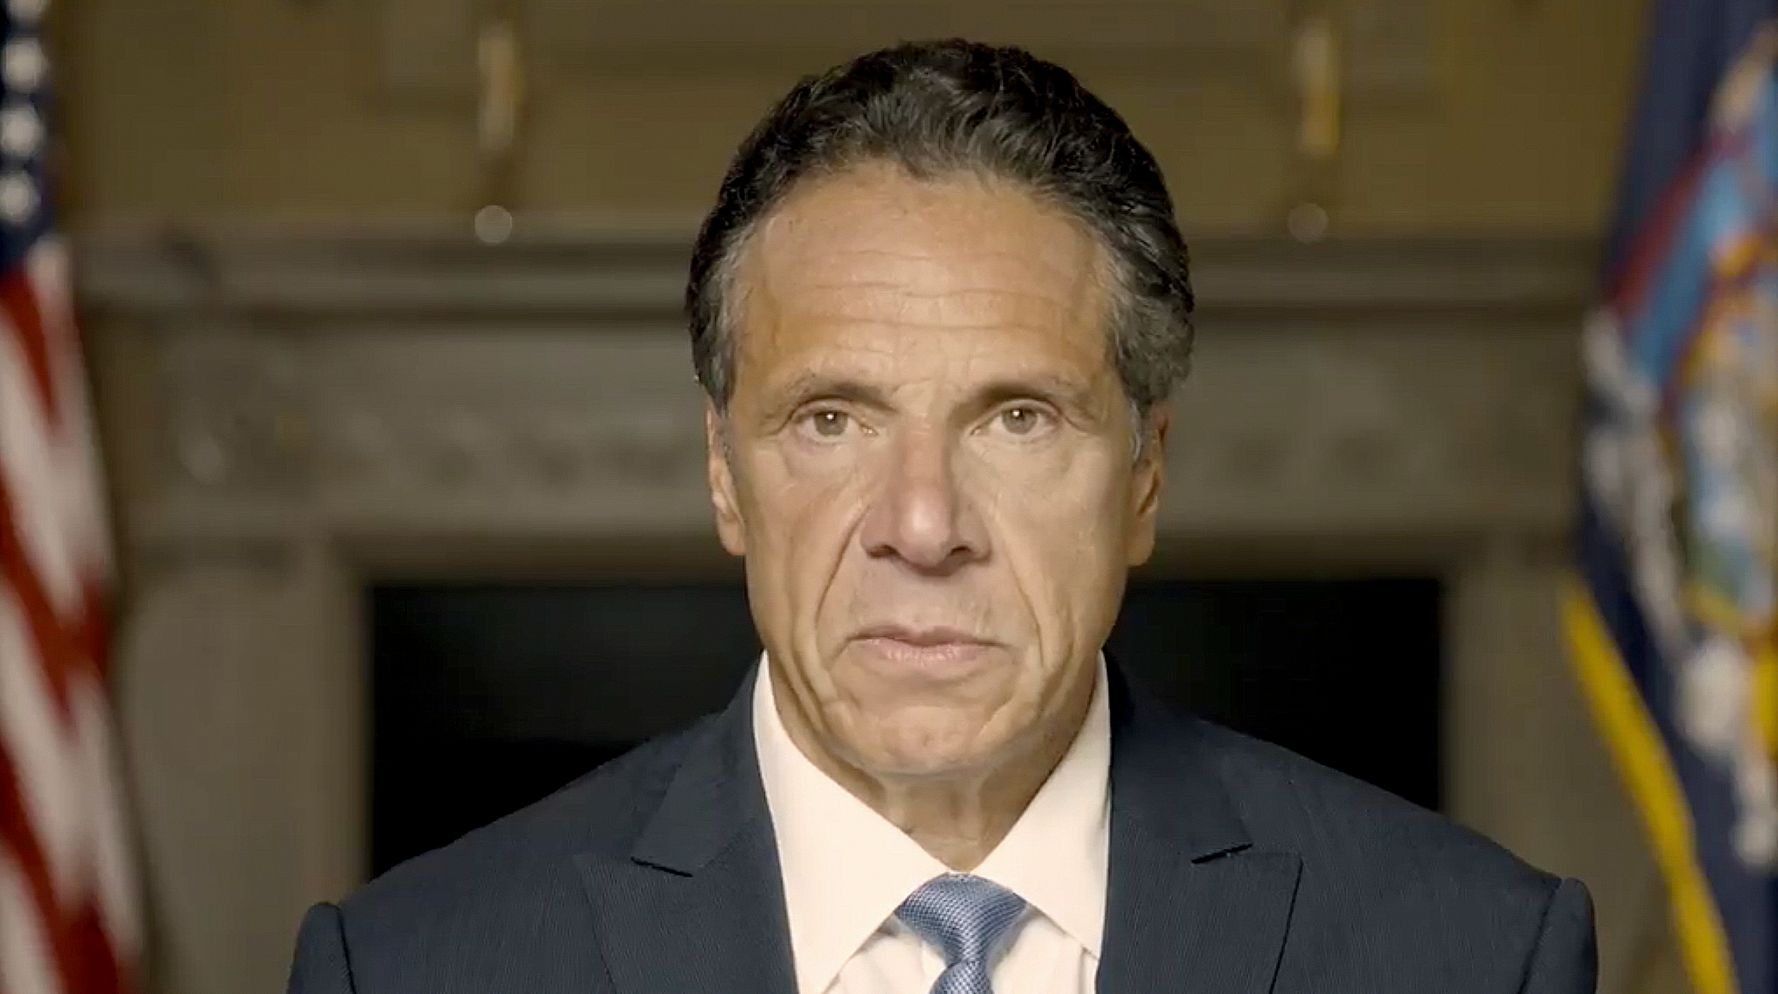 7 Cringeworthy Moments From Cuomo's Address On Sexual Harassment Claims